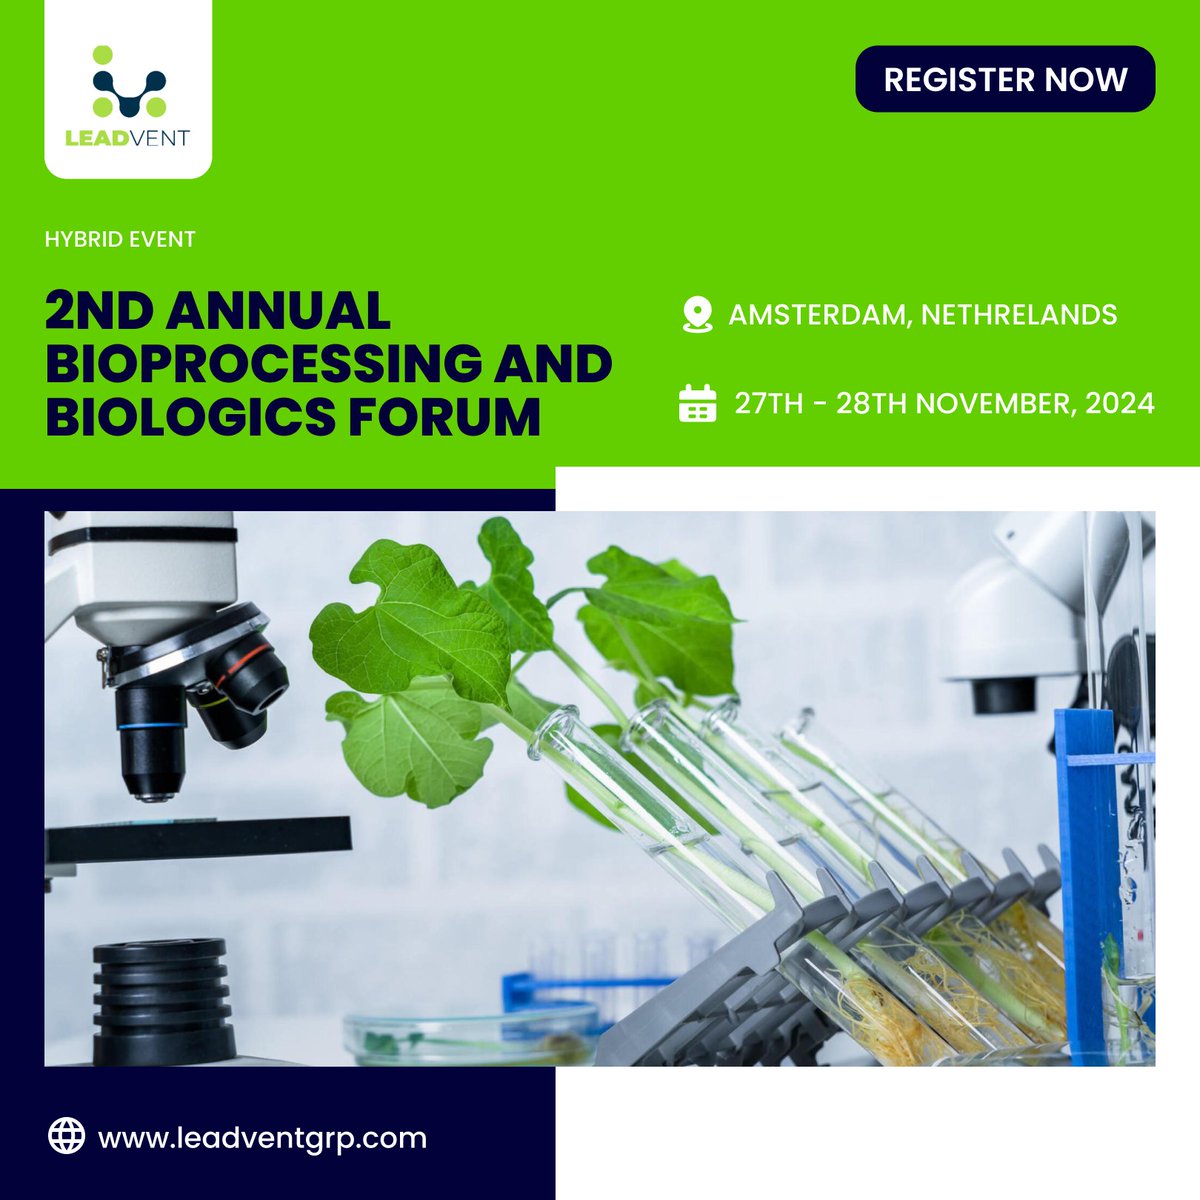 Step into the Future at the 2nd Annual Bioprocessing and Biologics Forum 2024!

Save the Date: 27th -28th November, 2024 in Amsterdam, Netherlands

t.ly/Z3aos

#BioprocessingForum